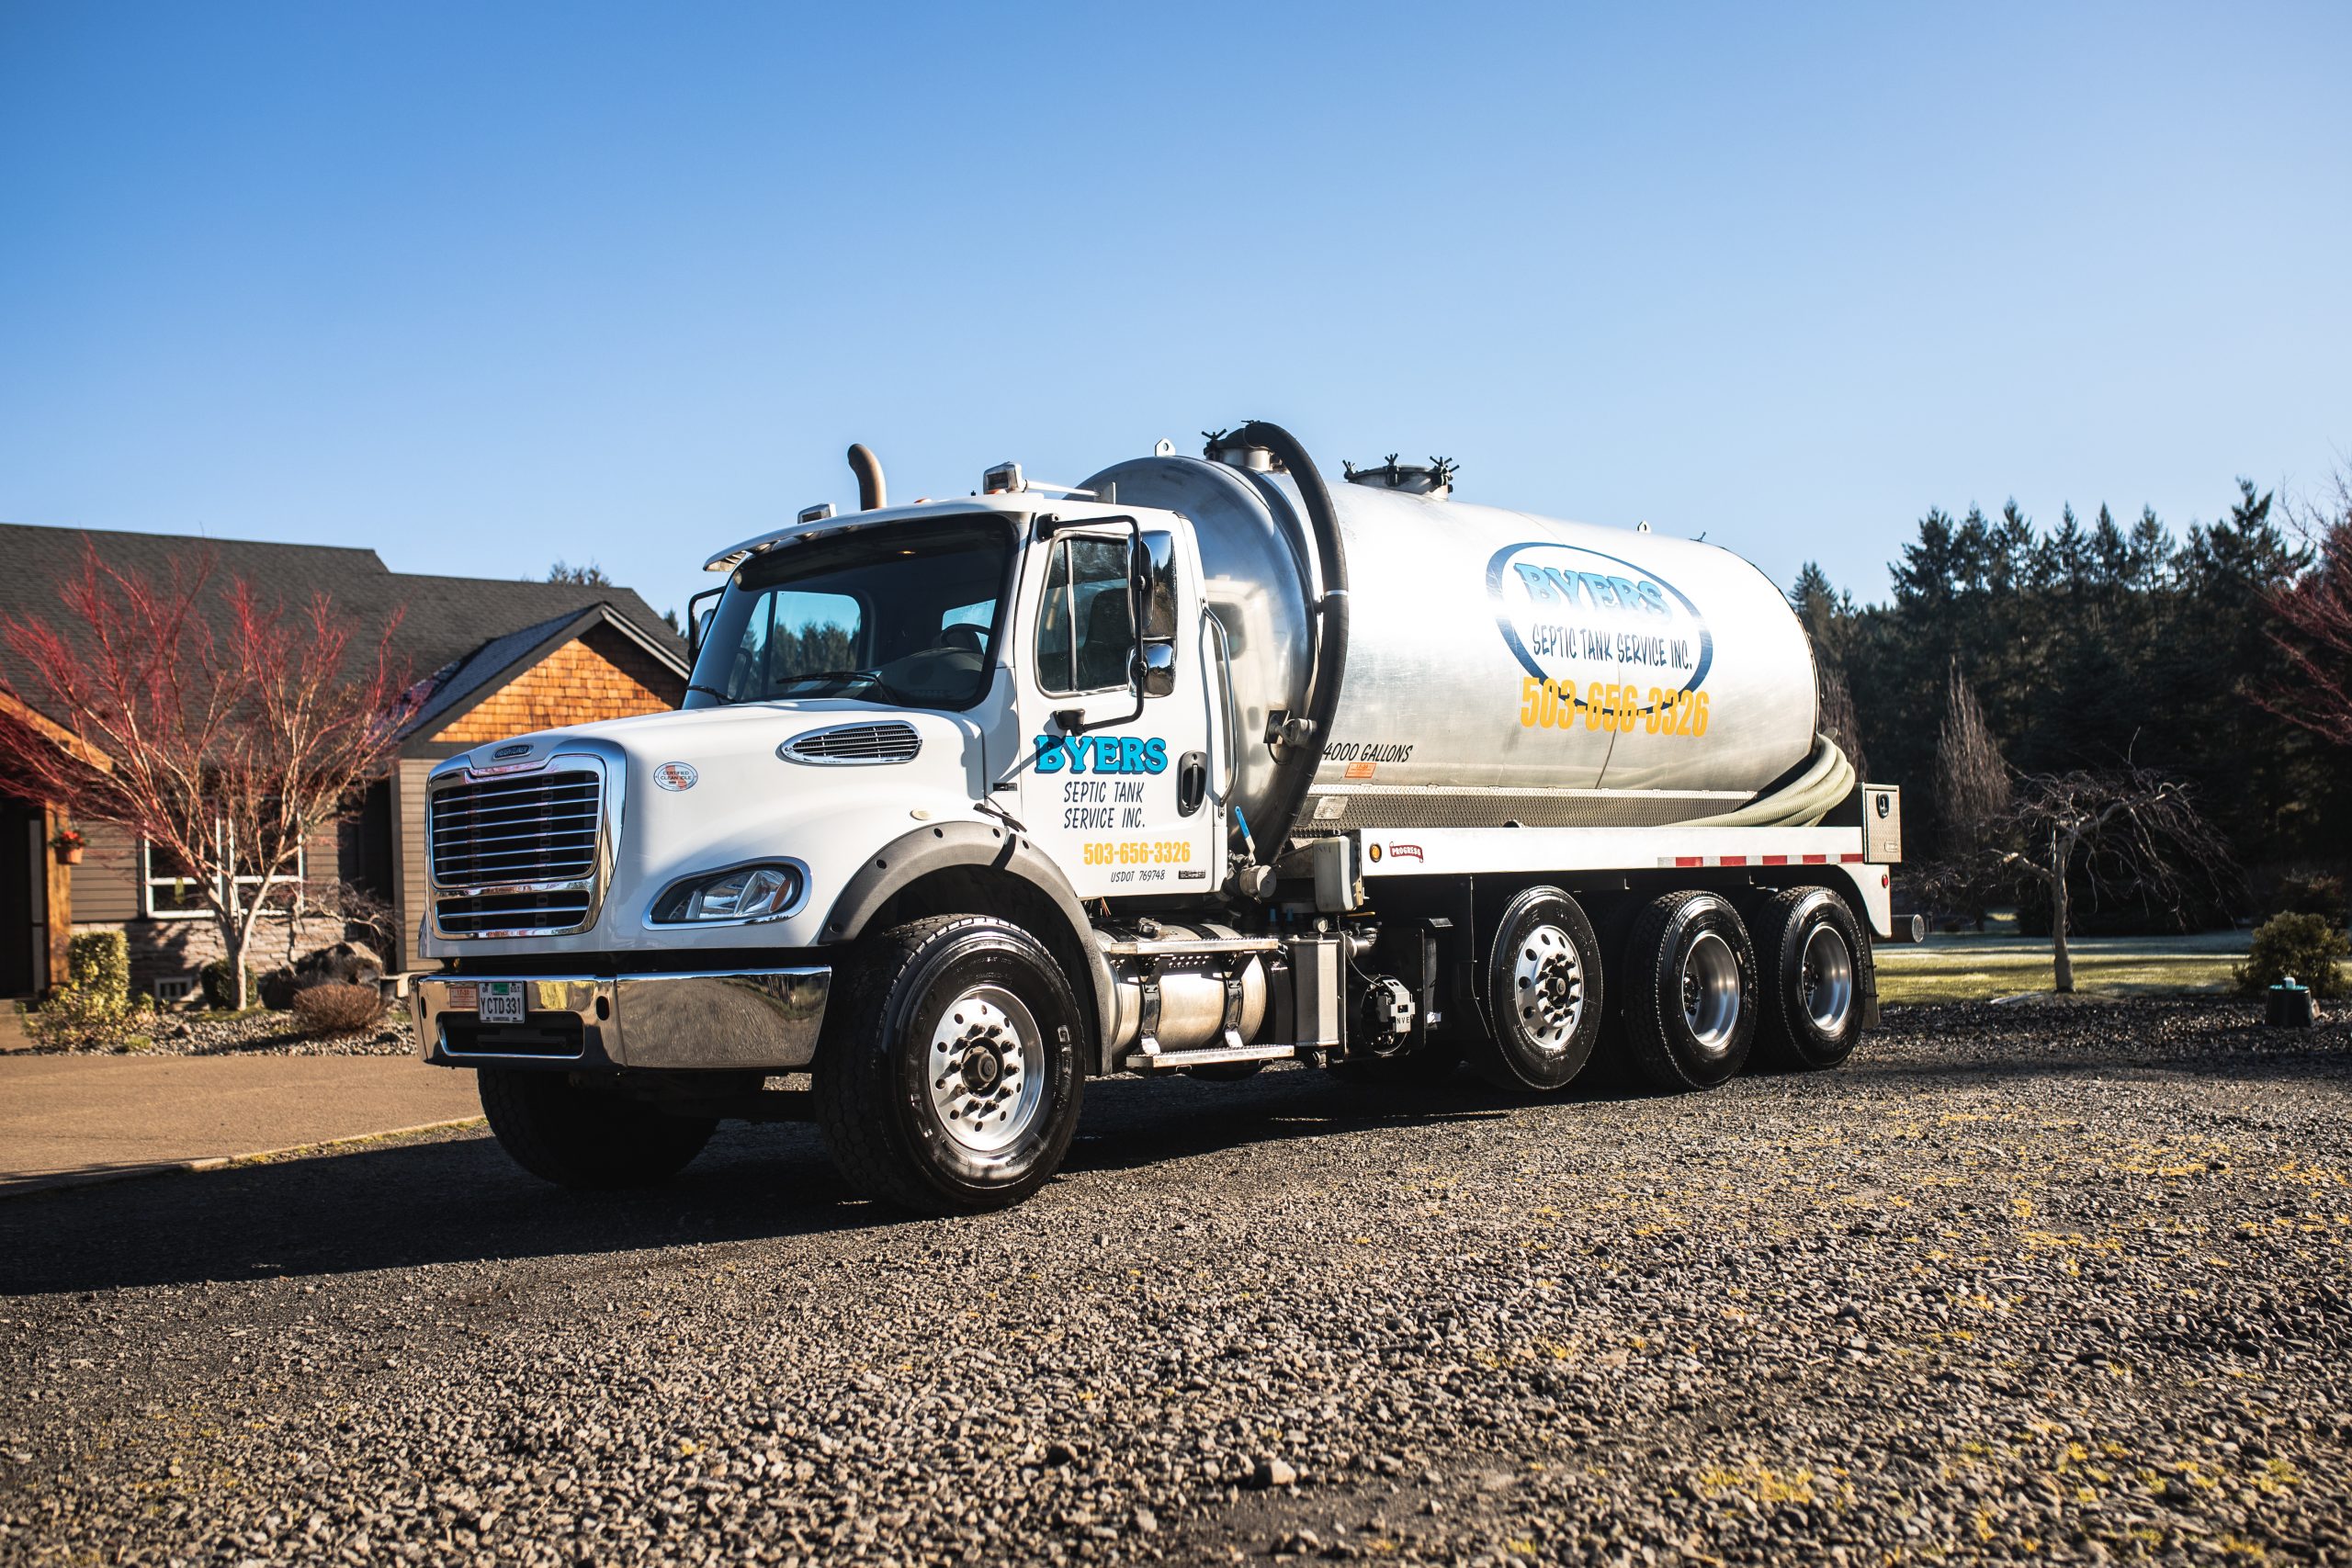 Image of Byers Tualatin Septic Tank Services at work